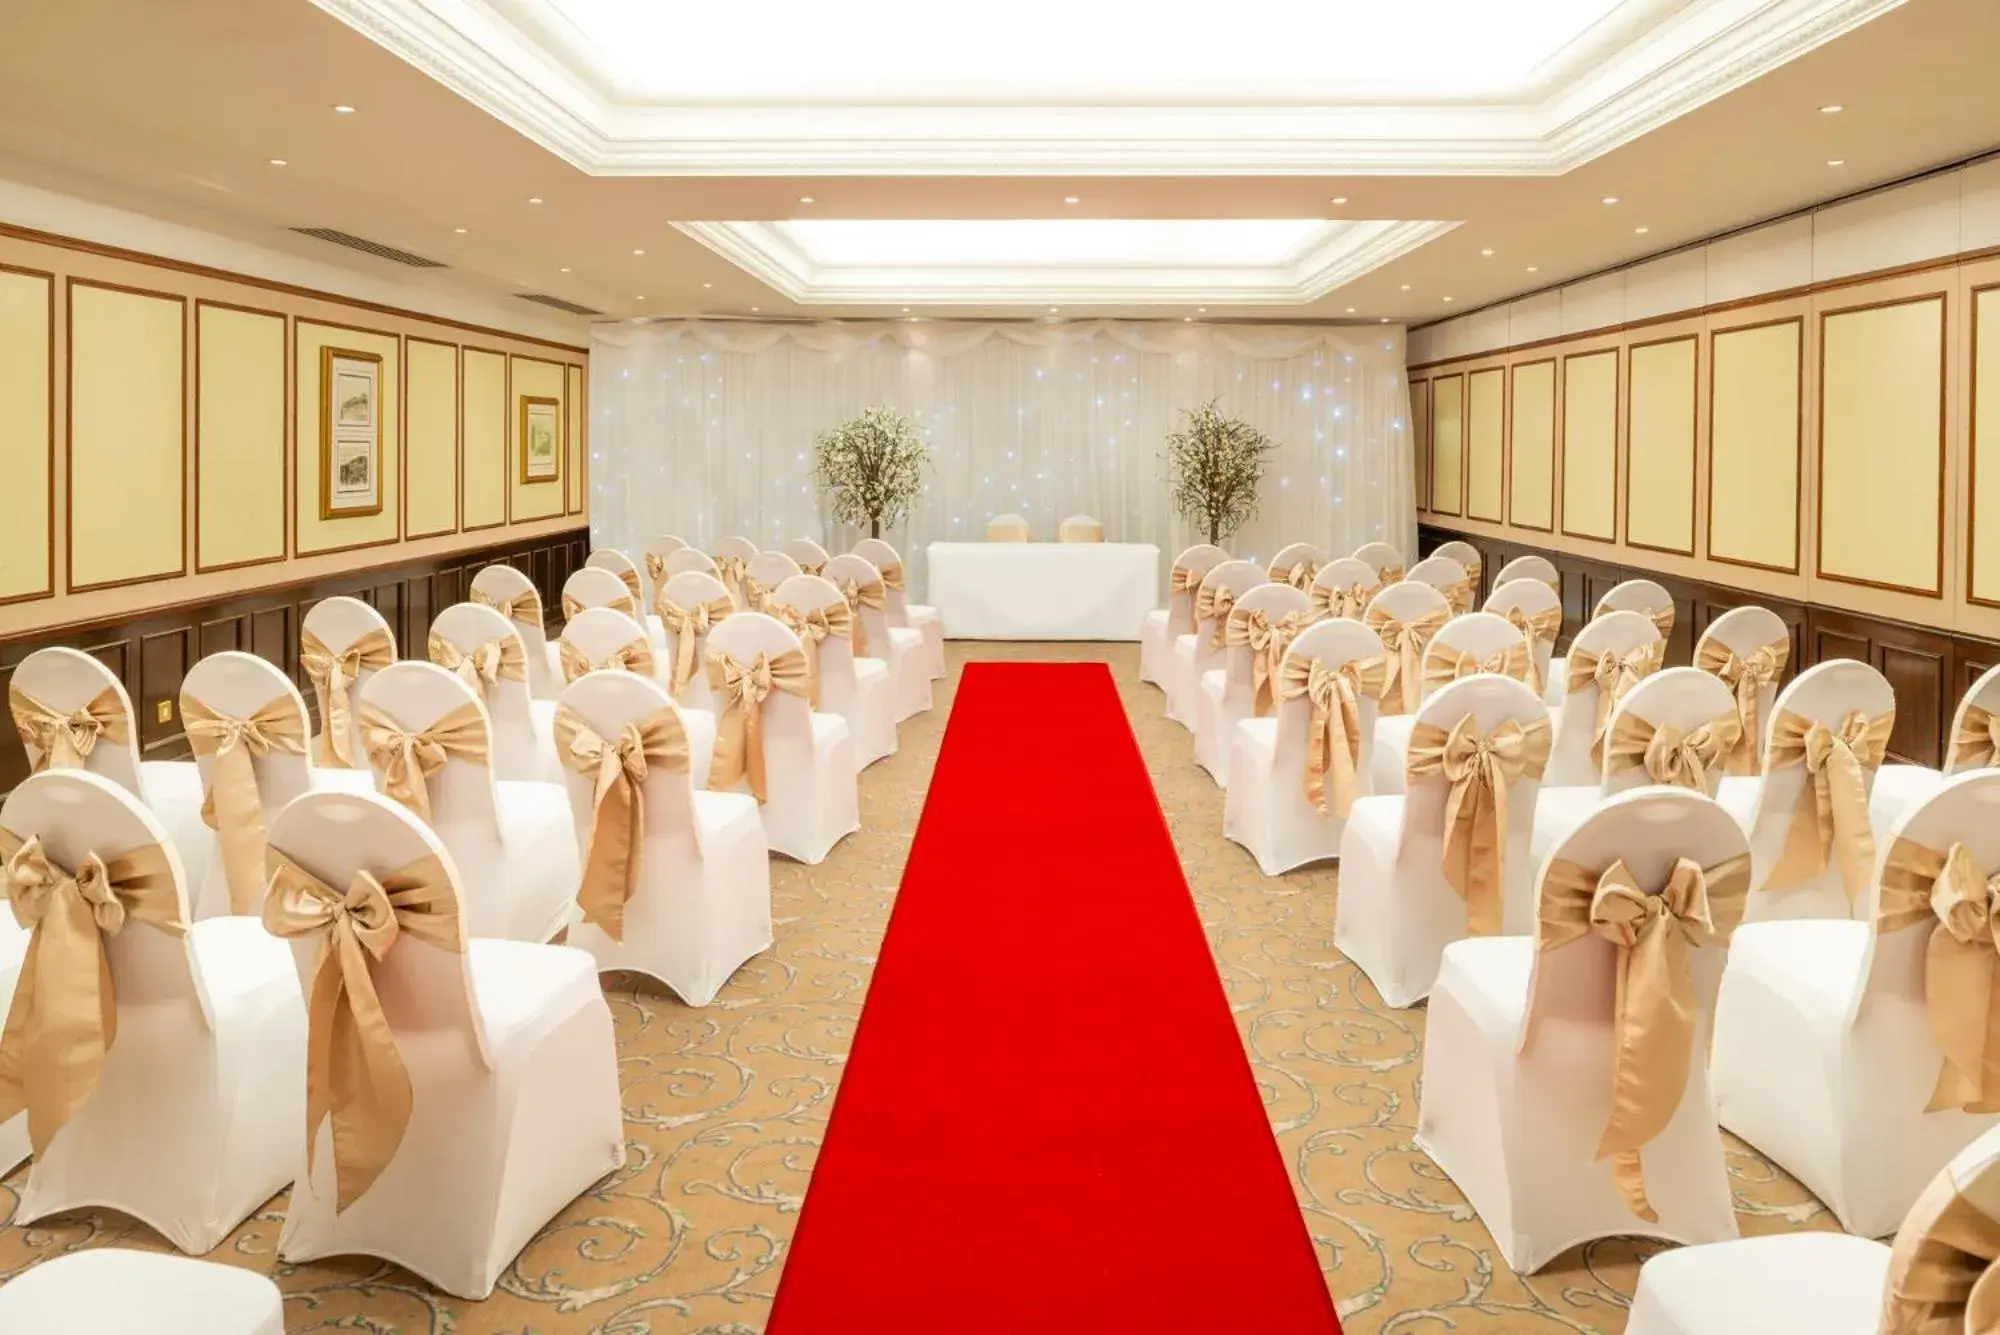 Banquet/Function facilities, Banquet Facilities in The Copthorne Hotel Cardiff